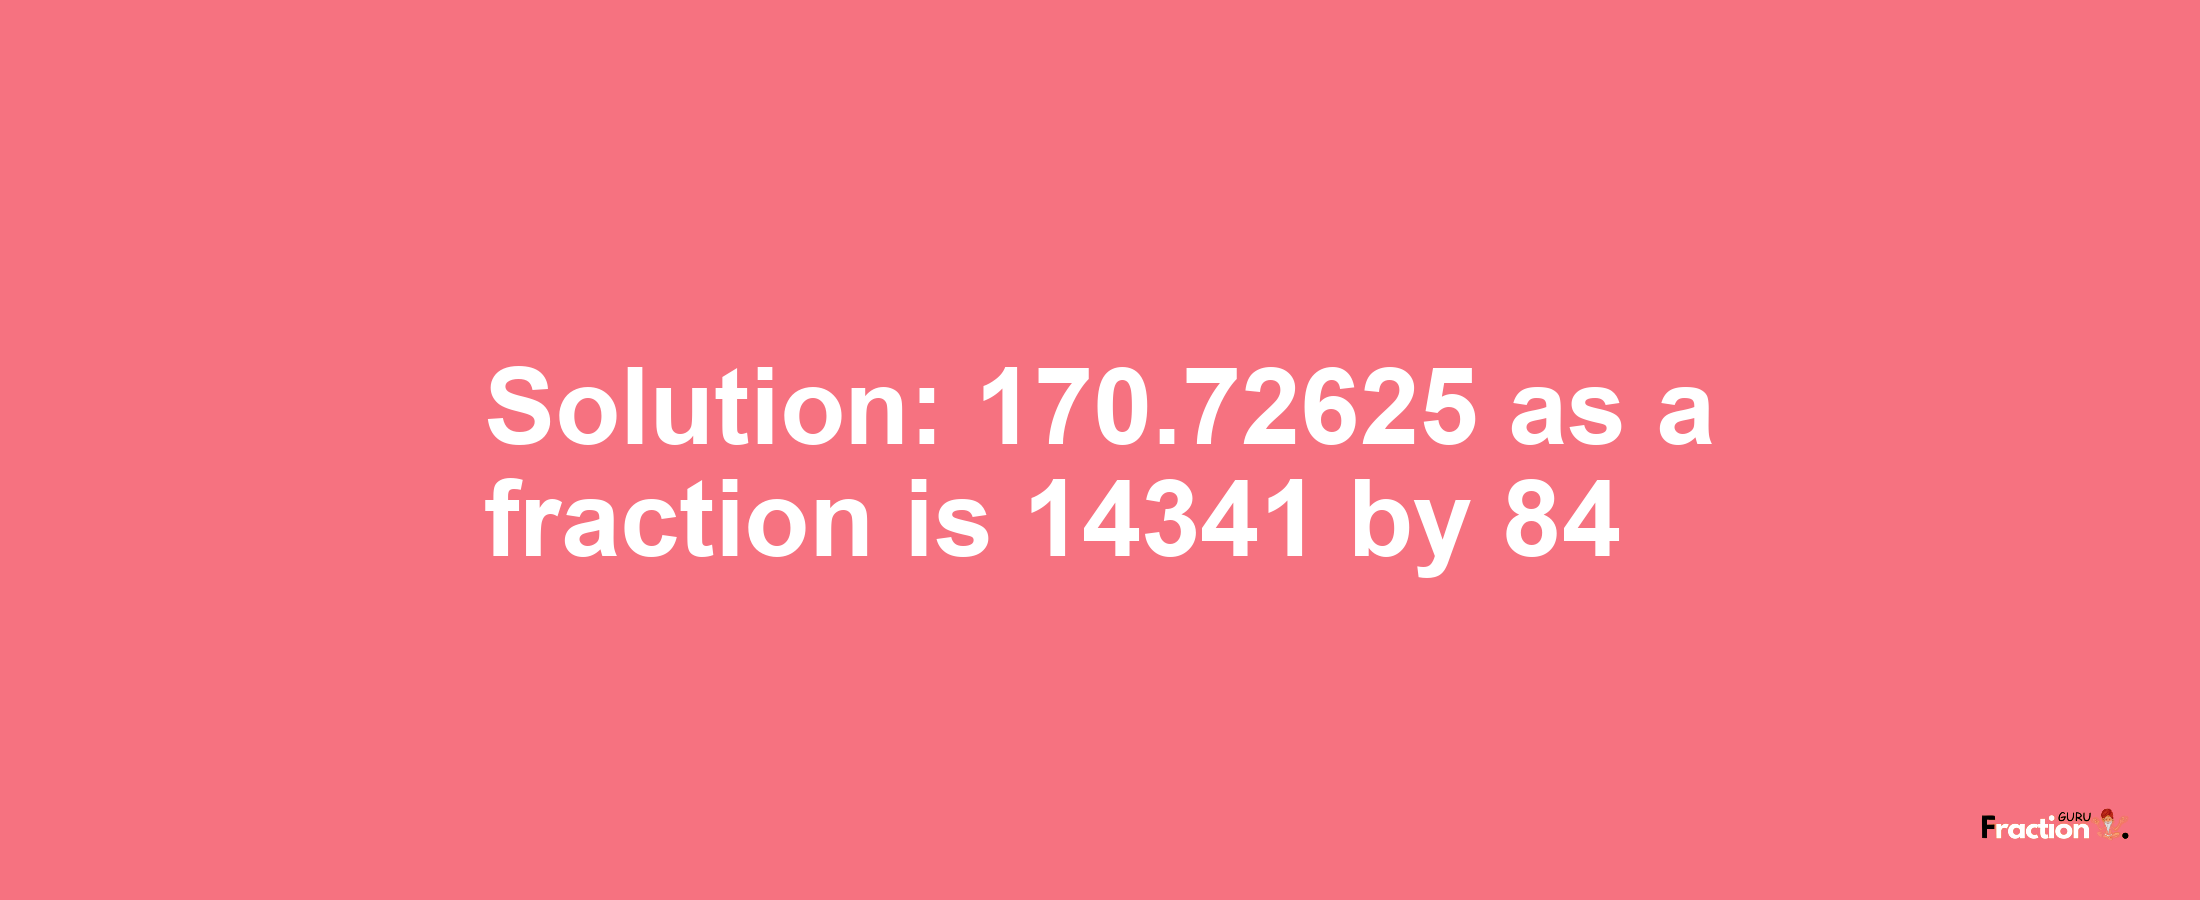 Solution:170.72625 as a fraction is 14341/84